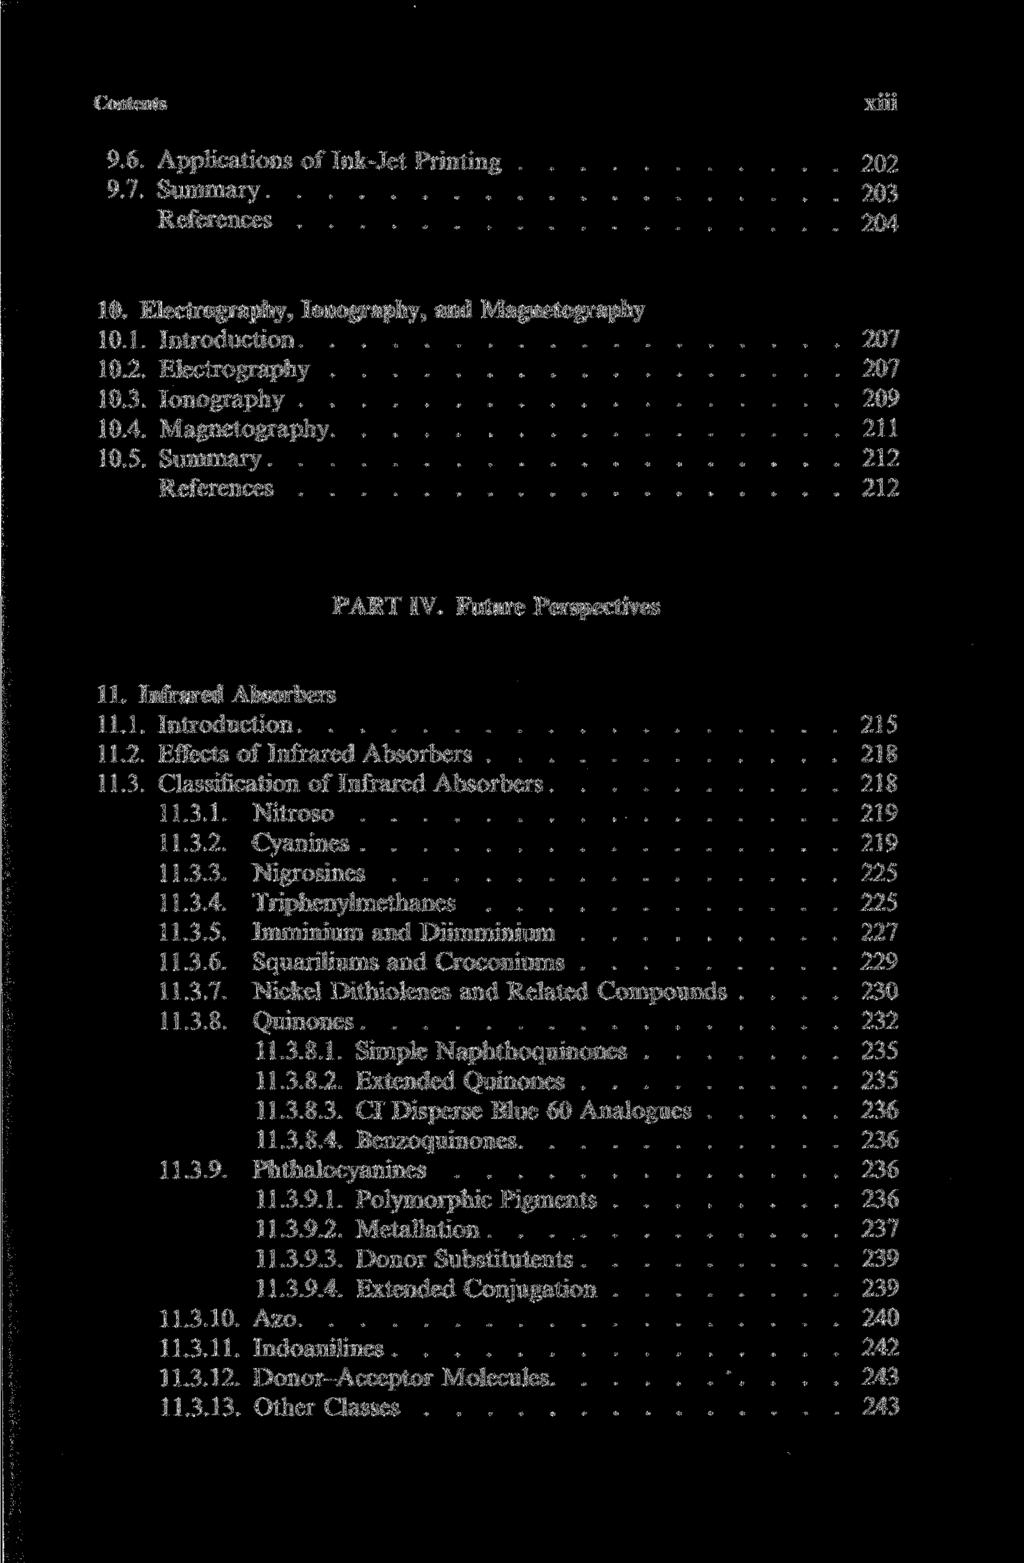 Contents XÜi 9.6. Applications of Ink-Jet Printing 202 9.7. Summary 203 References 204 10. Electrography, lonography, and Magnetography 10.1. Introduction 207 10.2. Electrography 207 10.3. lonography 209 10.